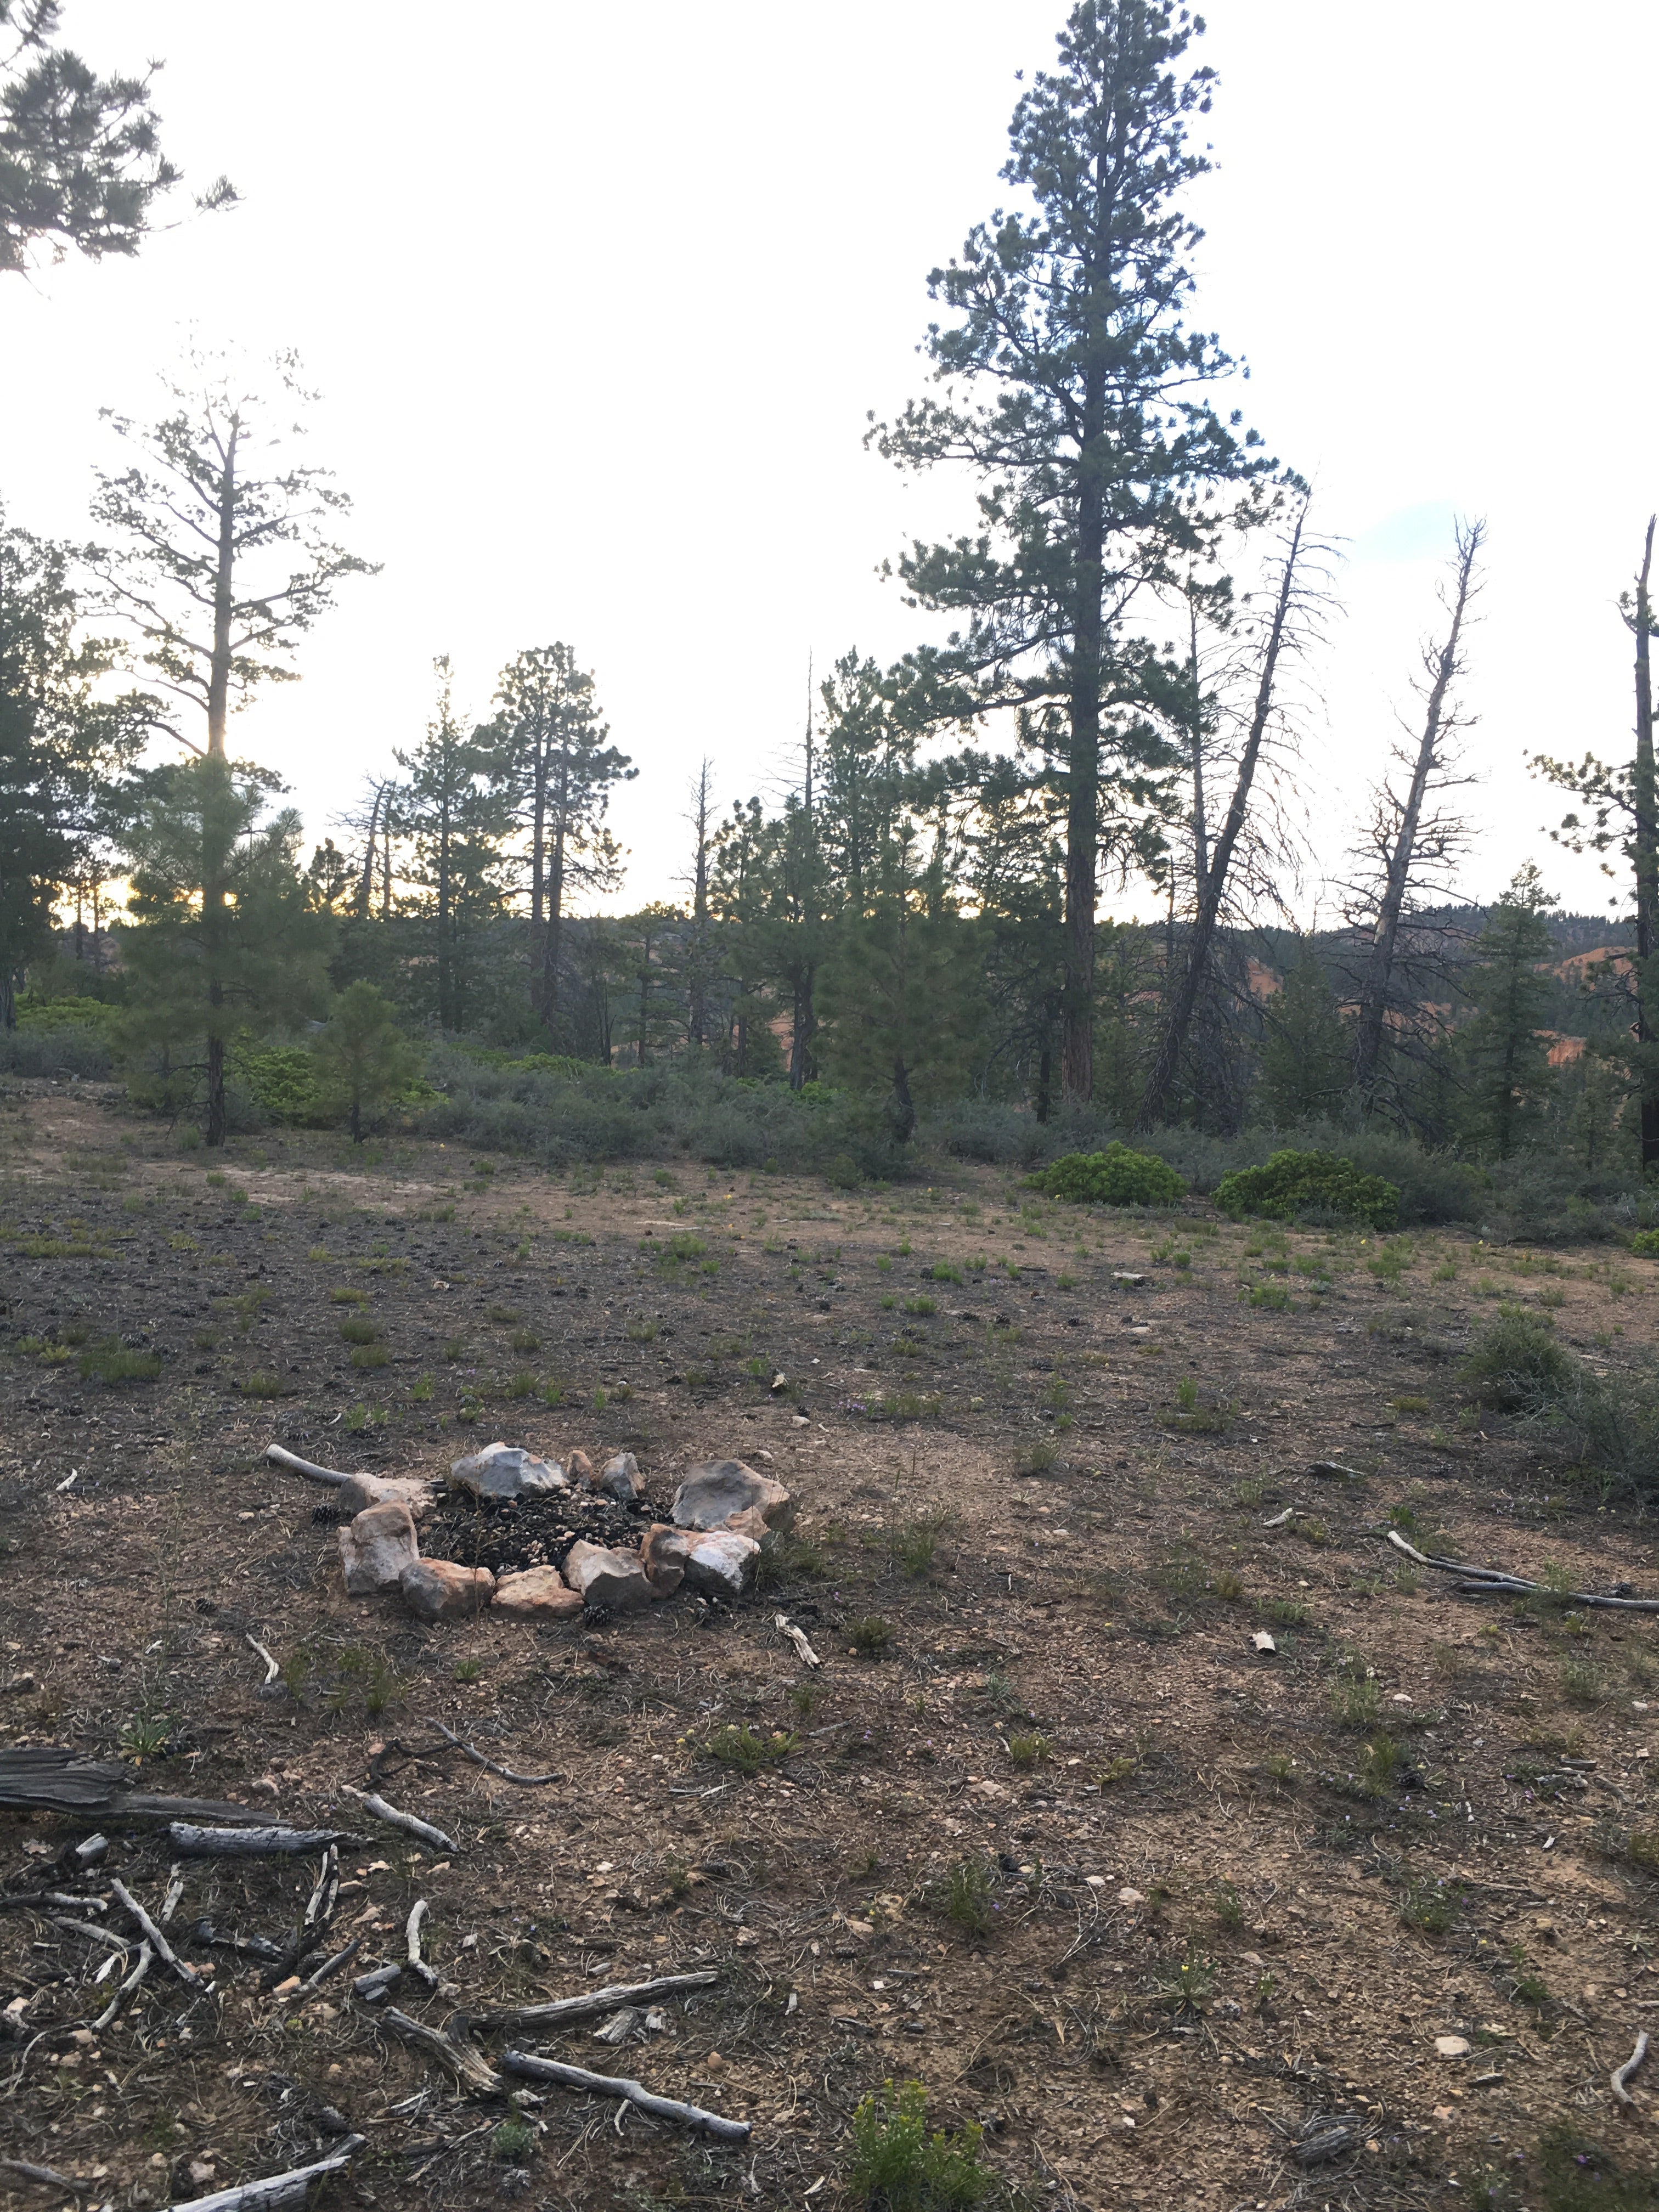 Camper submitted image from FS #117 Rd Dispersed Camping - 1